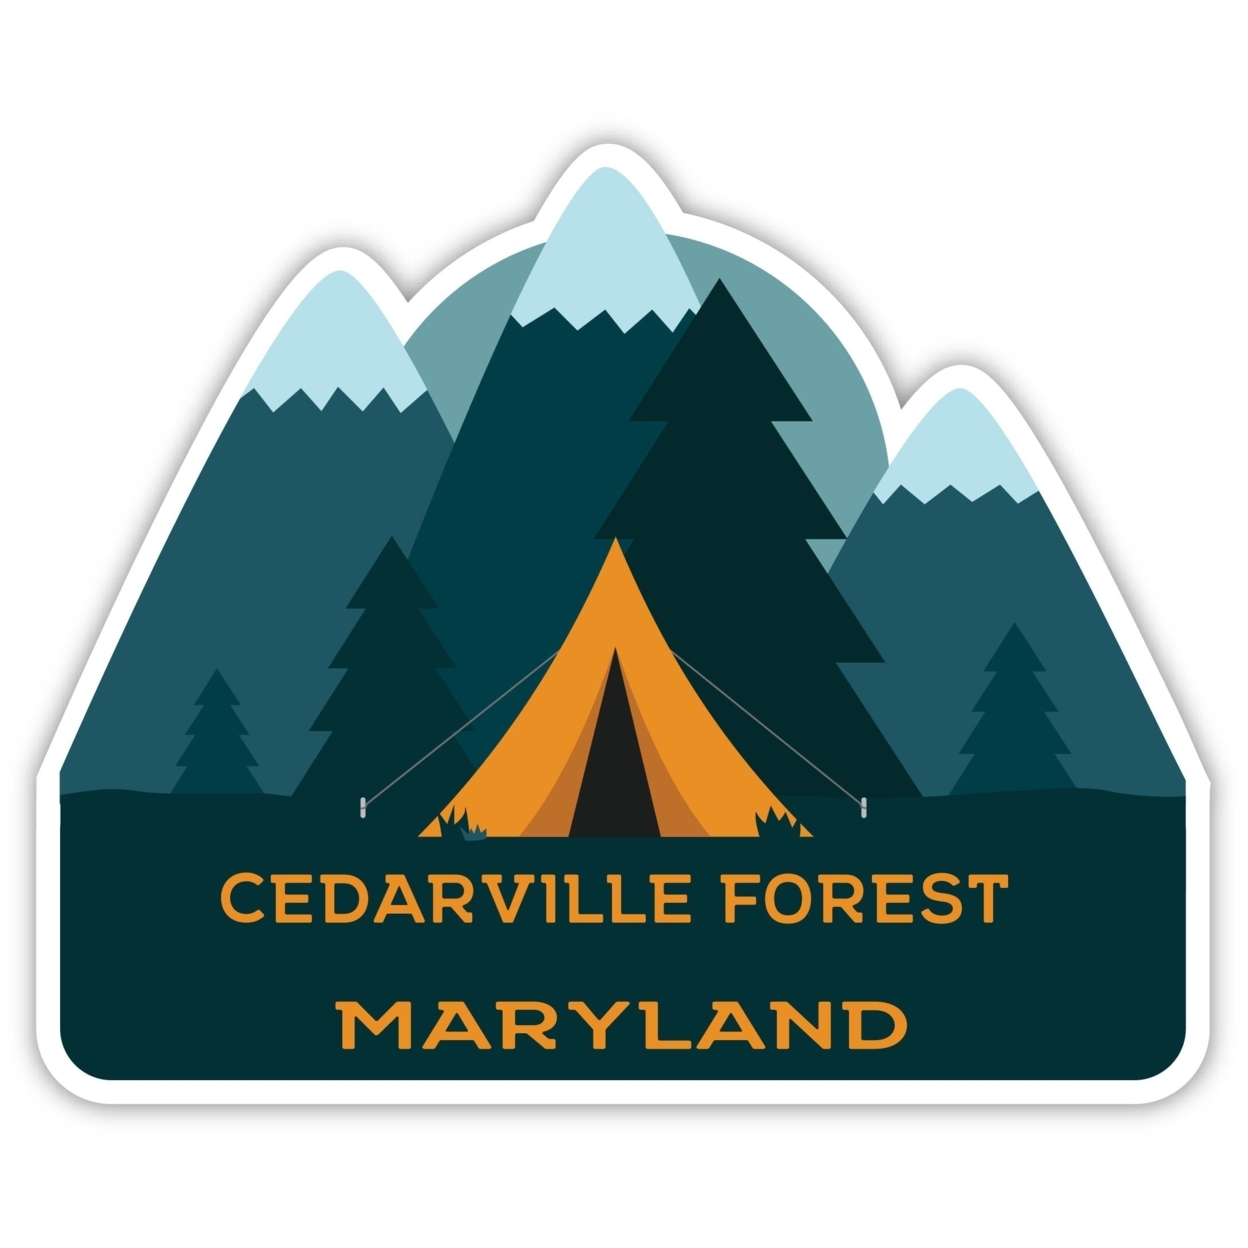 Cedarville Forest Maryland Souvenir Decorative Stickers (Choose Theme And Size) - 4-Pack, 2-Inch, Tent